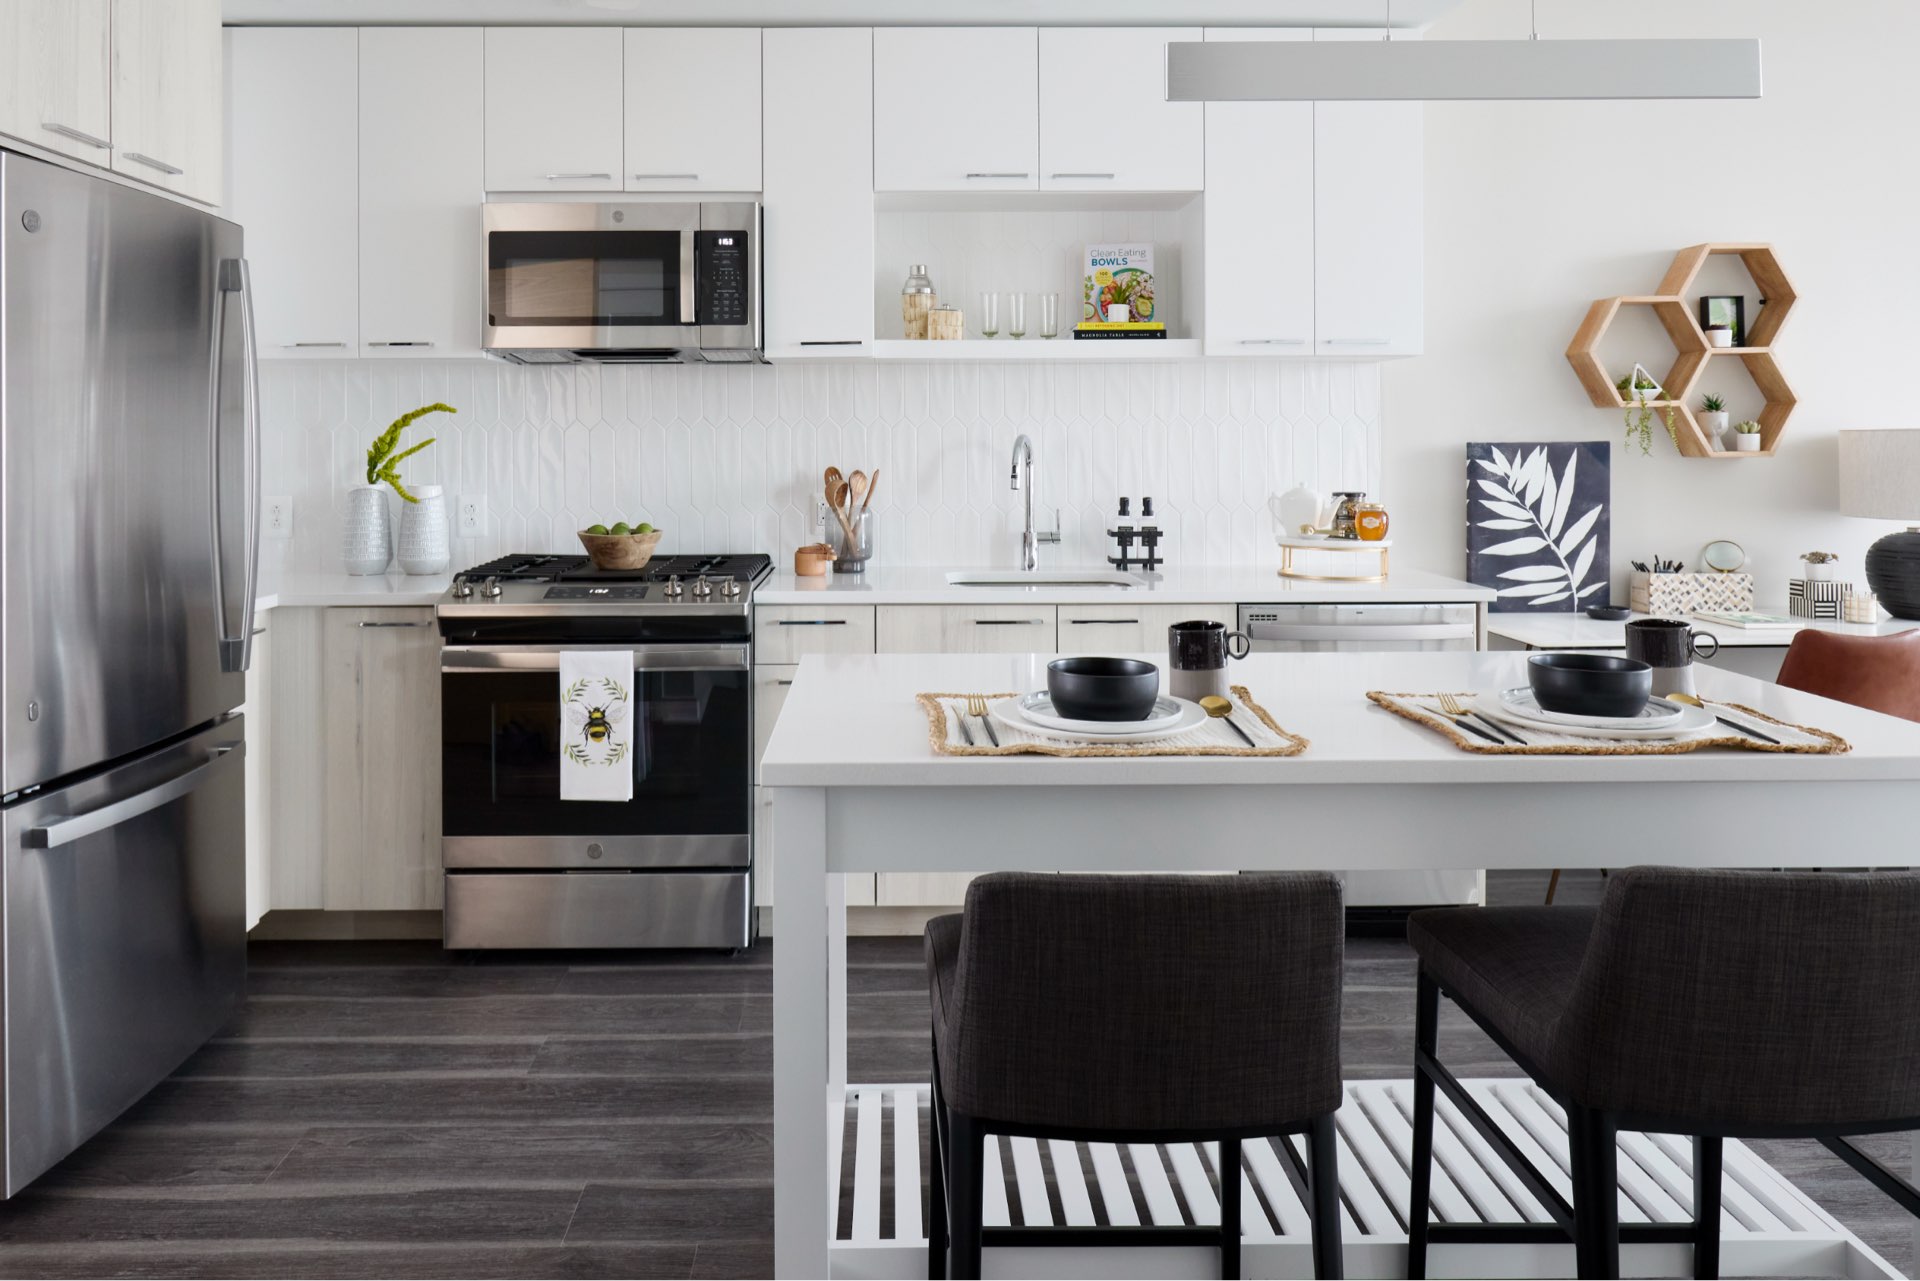 Reese features gourmet kitchens with energy efficient stainless steel appliances, quartz countertops and undermount sinks